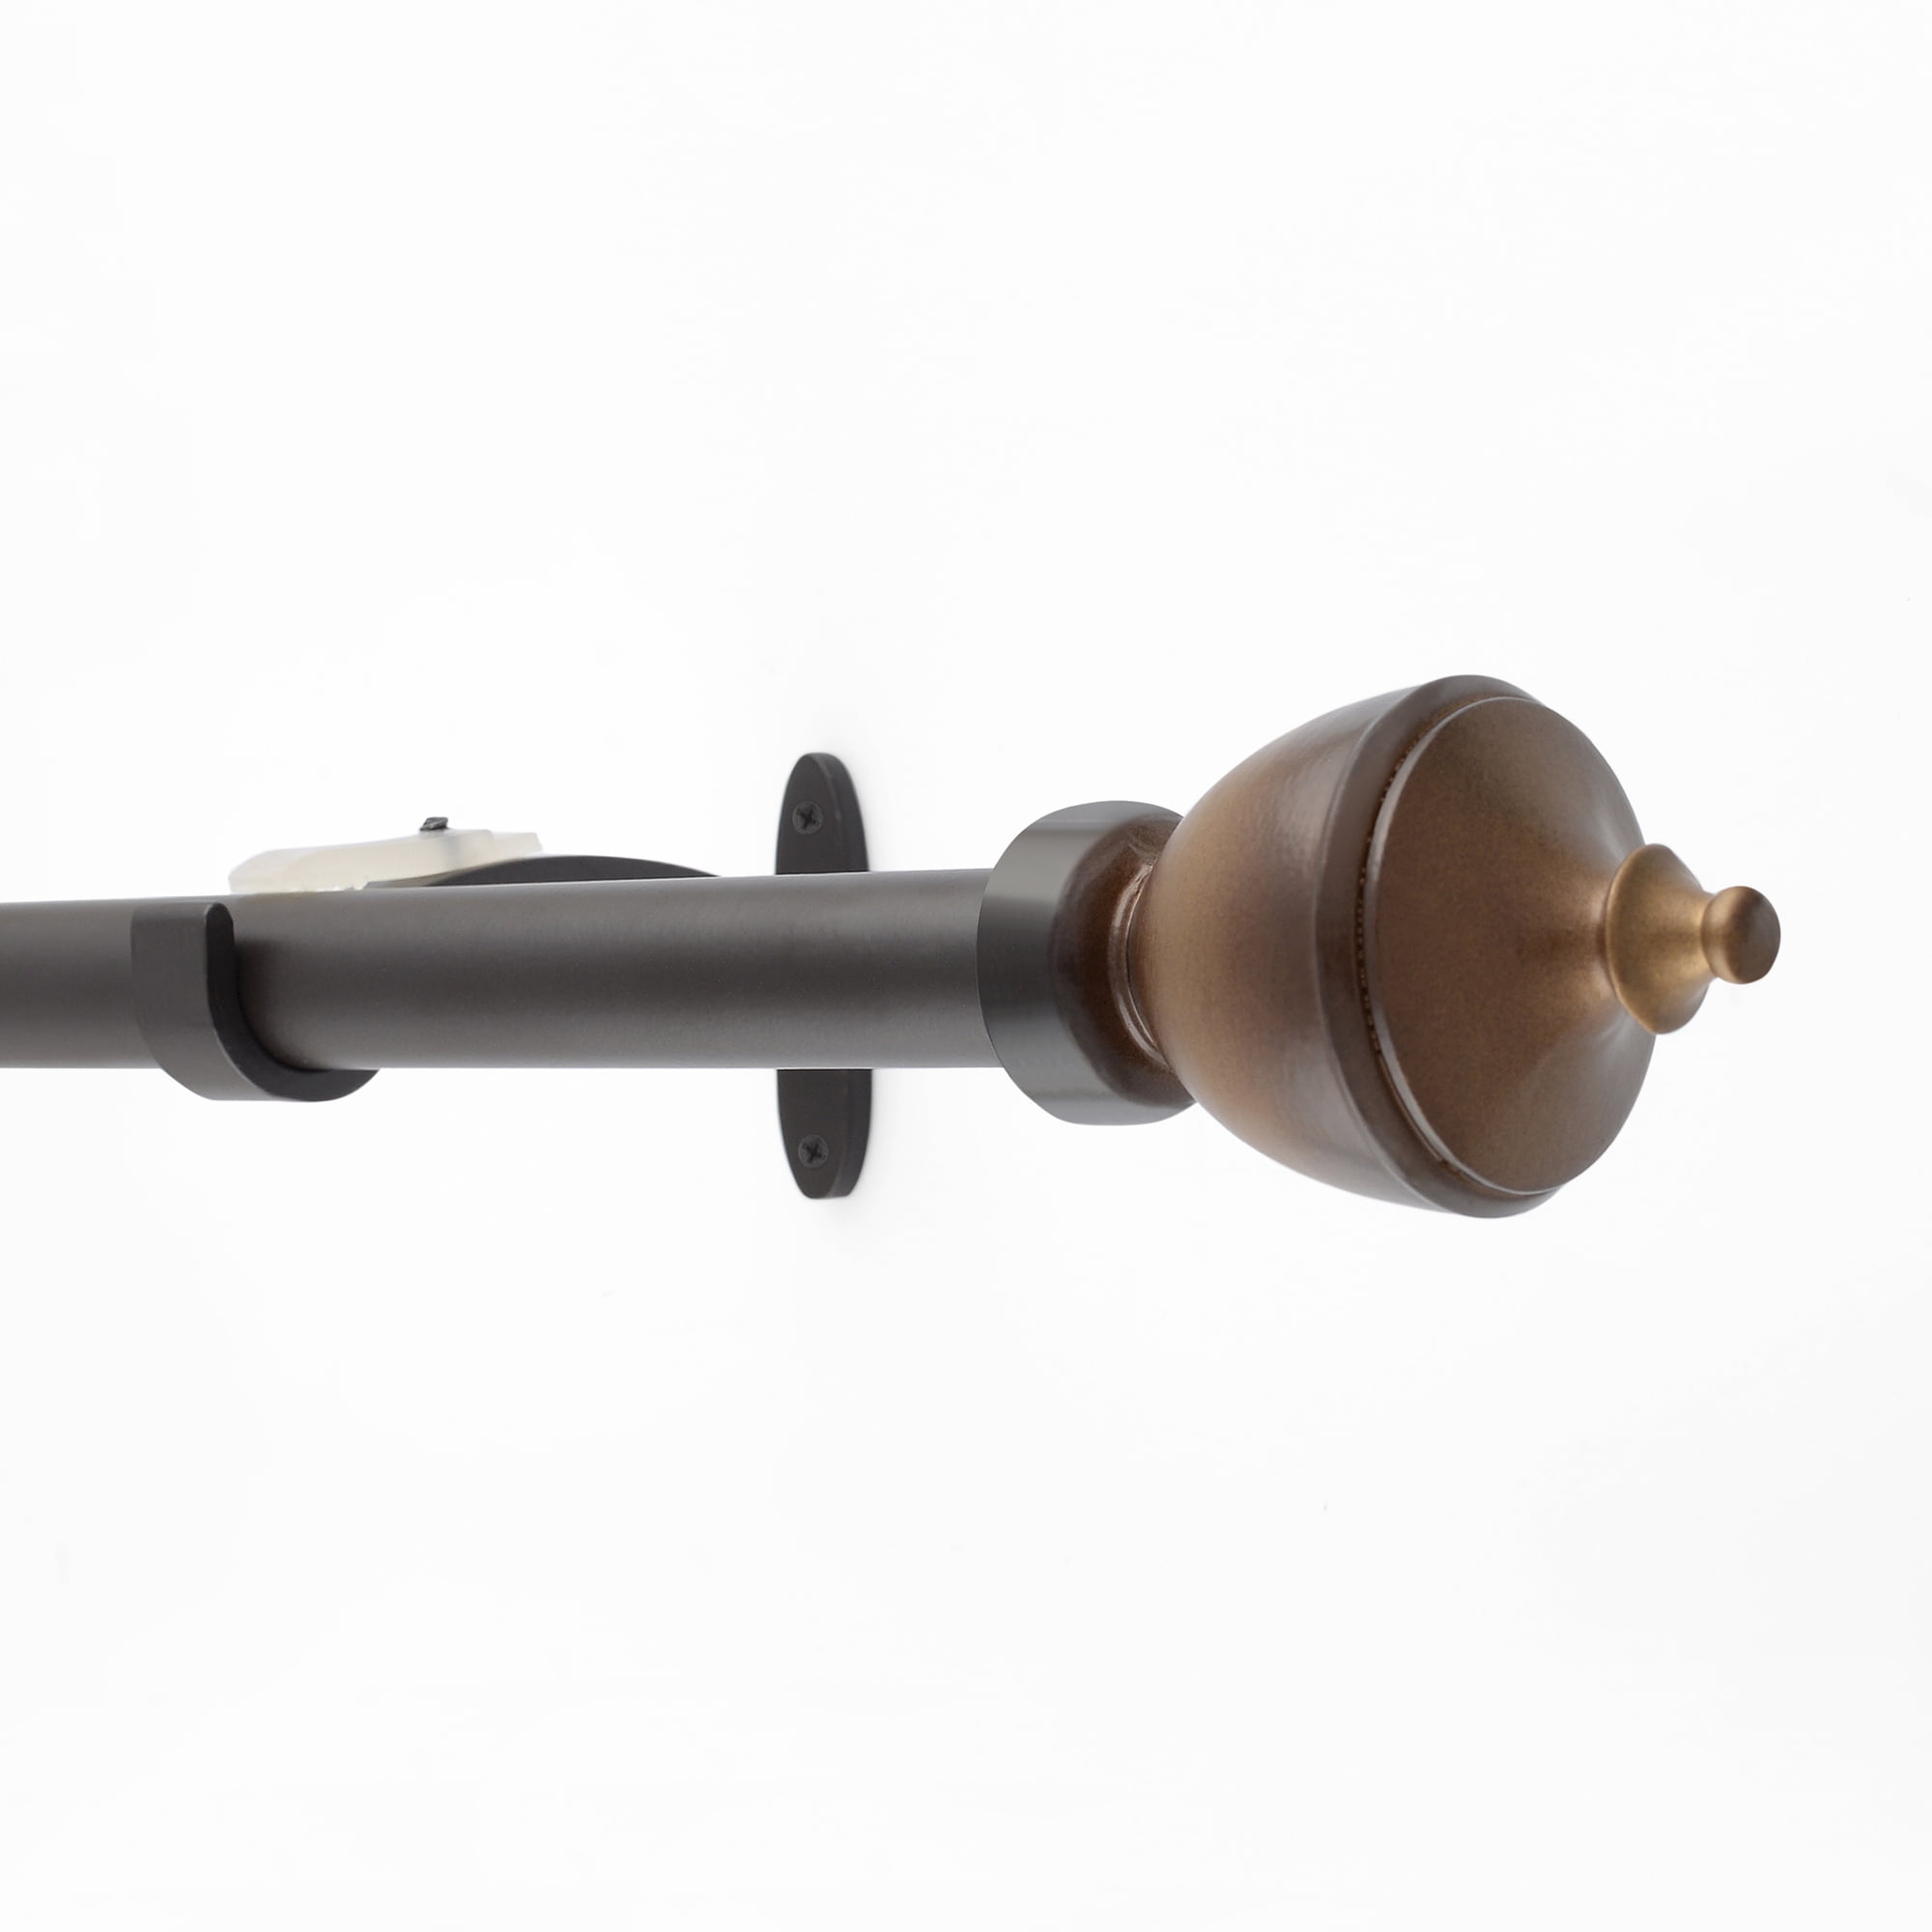 132-366 CM FUSION ROUND WOOD BALL EXTENDABLE CURTAIN ROD - BROWN 25MM